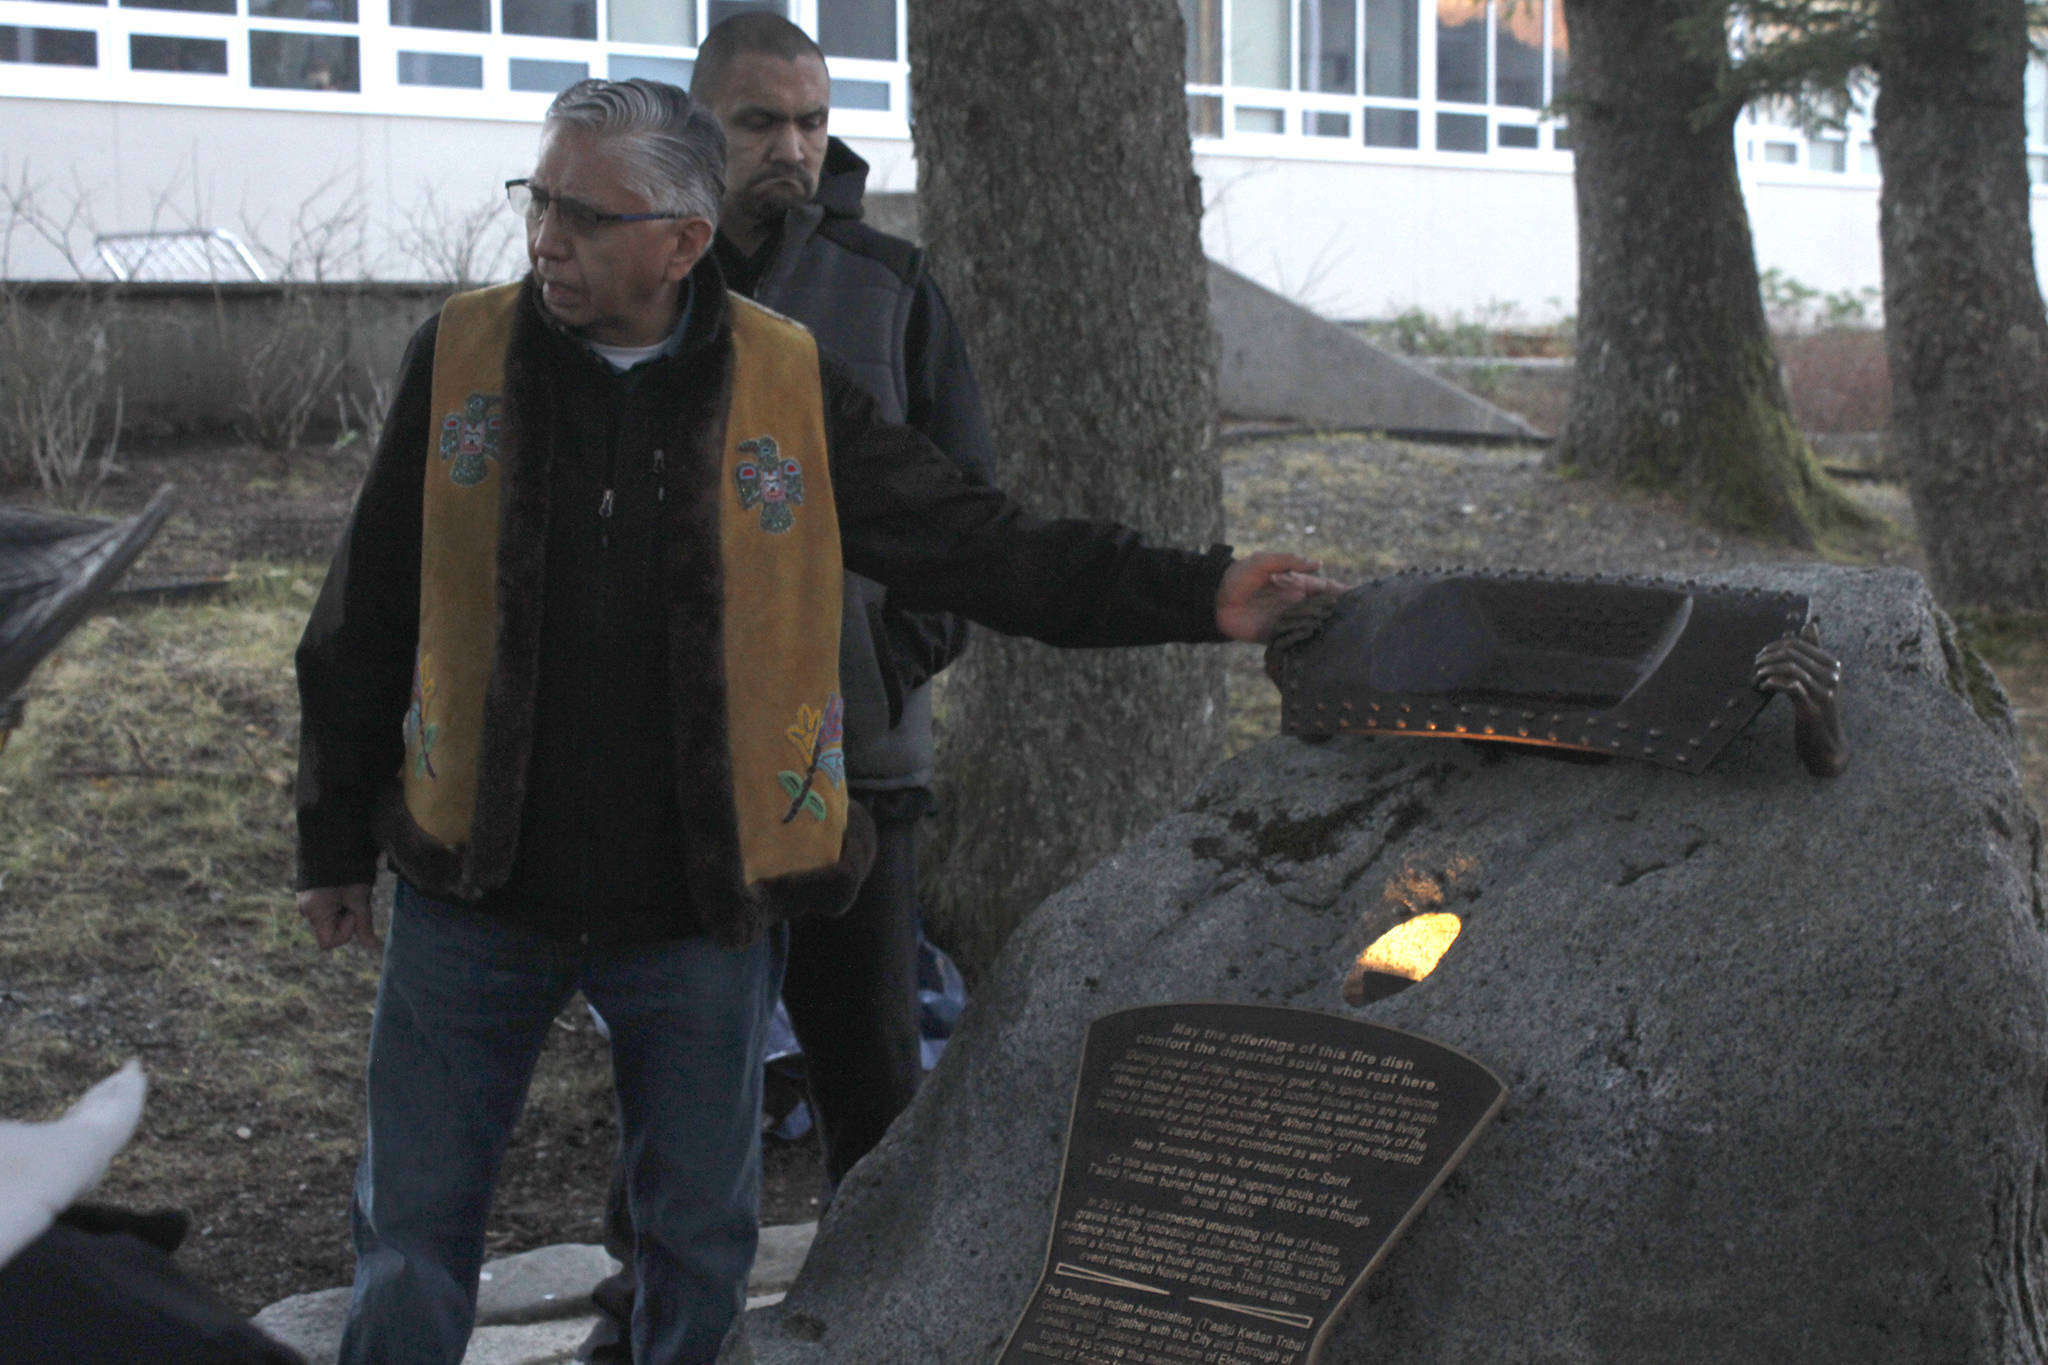 Tlingit elder Paul Marks presents the Sayéik Sacred Site Memorial on Friday, Nov. 23, 2018. The memorial, placed at Sayéik Gastineau Community School, is a tribute to the people who were buried in the Tlingit burial ground that was paved over for the road and school. (Alex McCarthy | Juneau Empire)